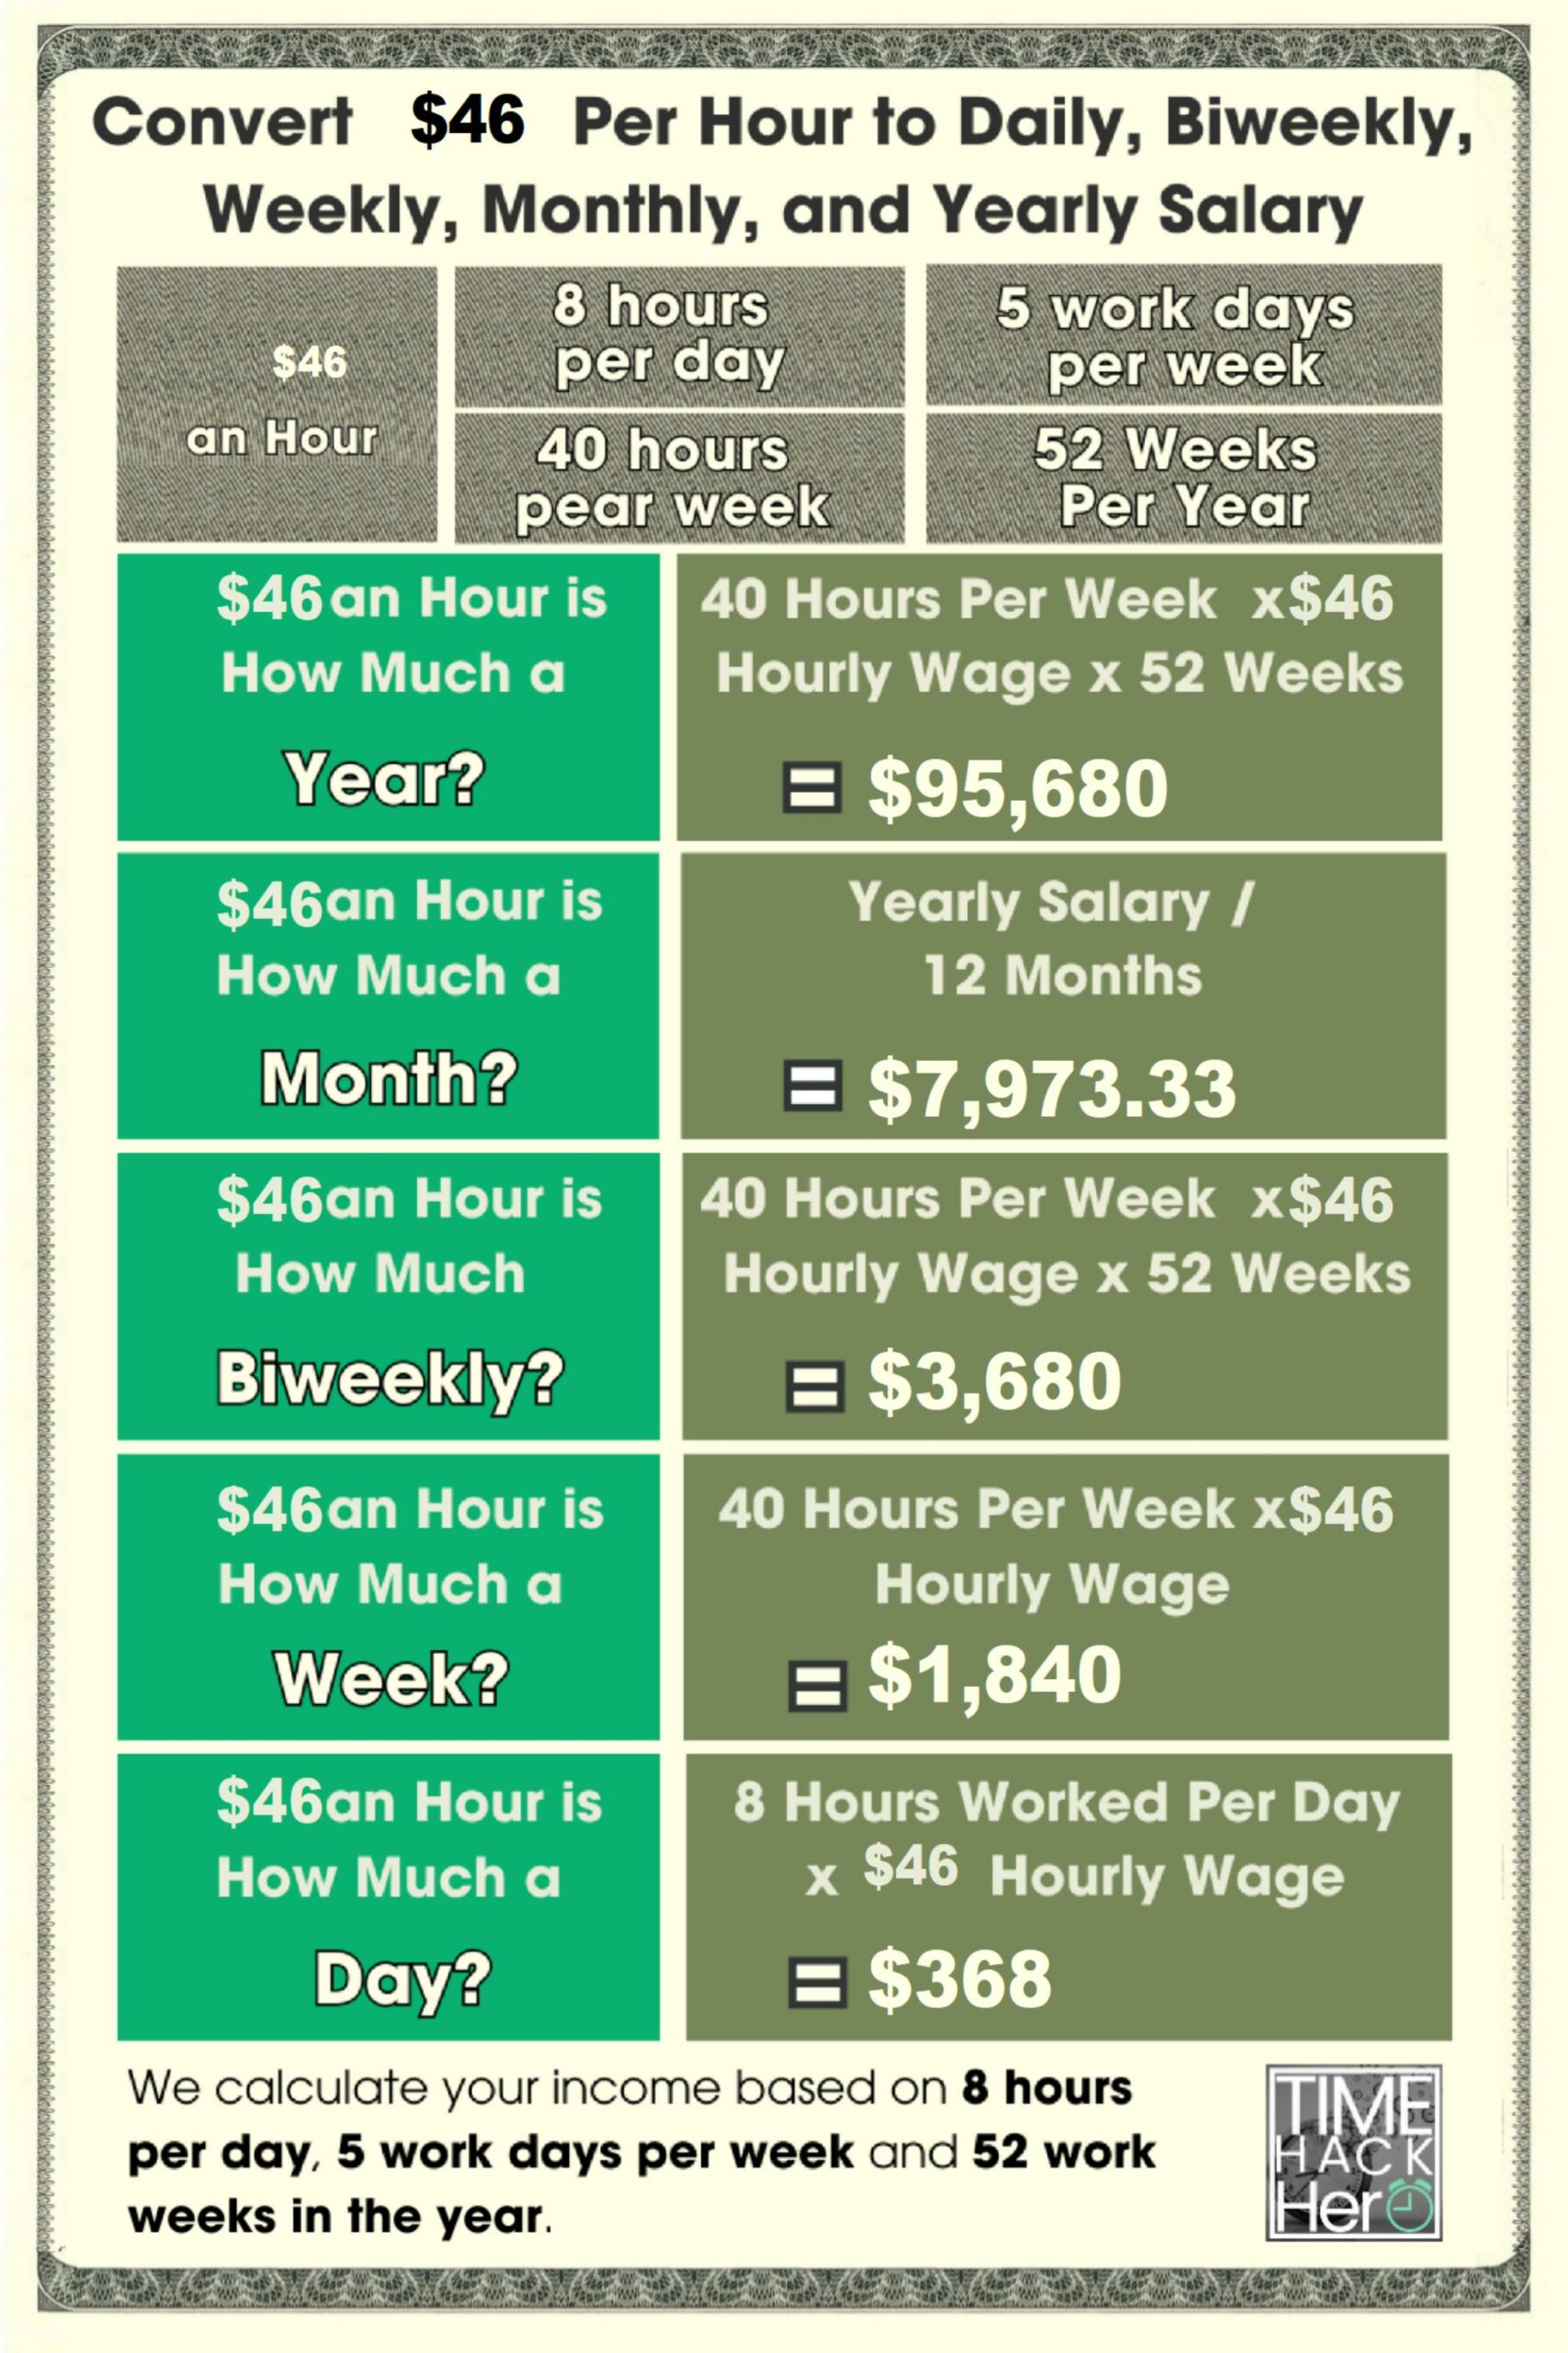 Convert $46 Per Hour to Weekly, Monthly, and Yearly Salary